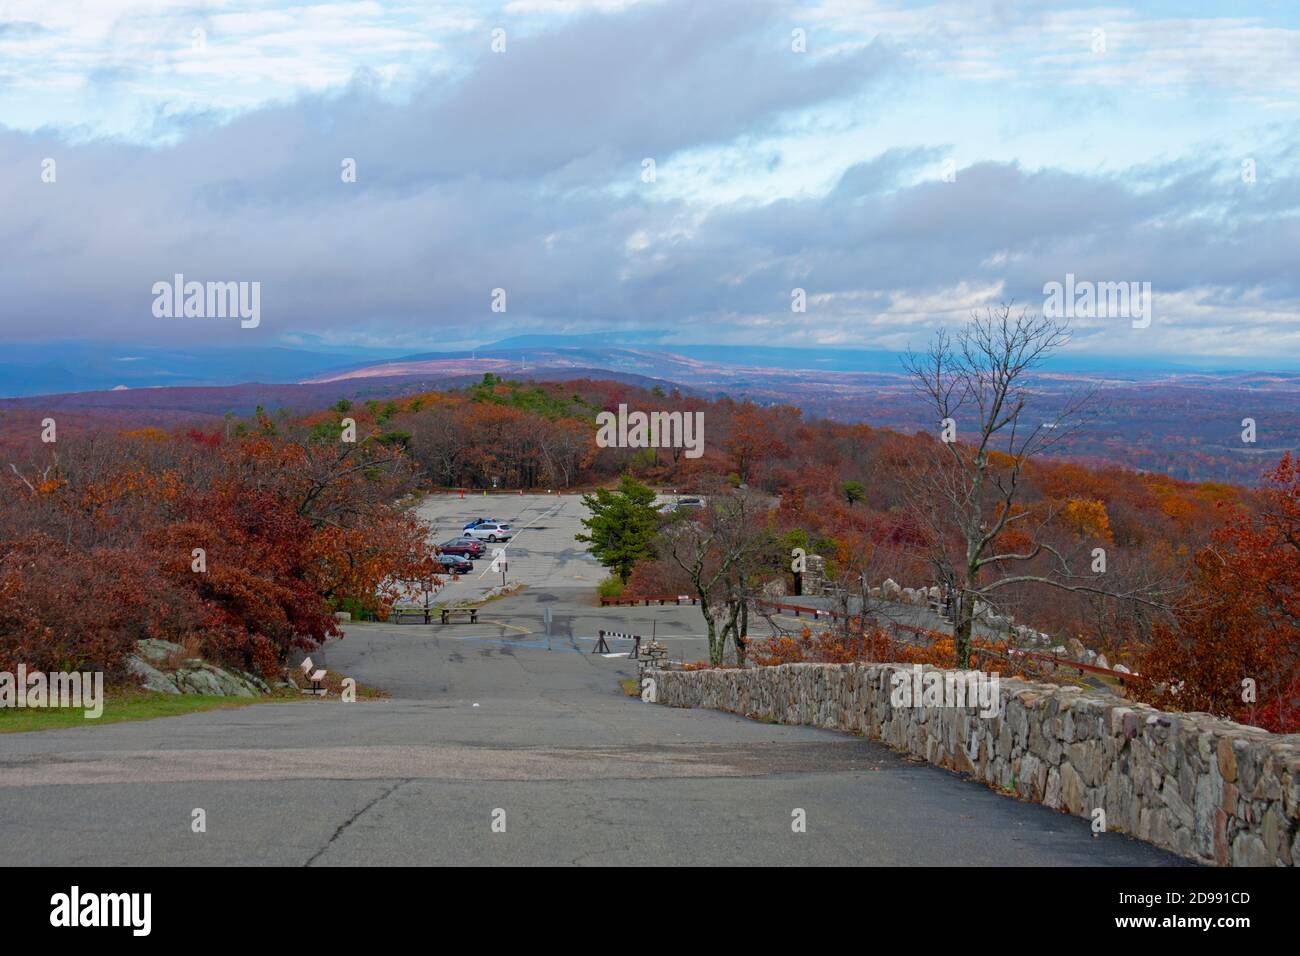 Cloudy skies, an automobile parking area, and lush Autumn foliage at High Point Monument area of High Point State Park in New Jersey, USA -06 Stock Photo